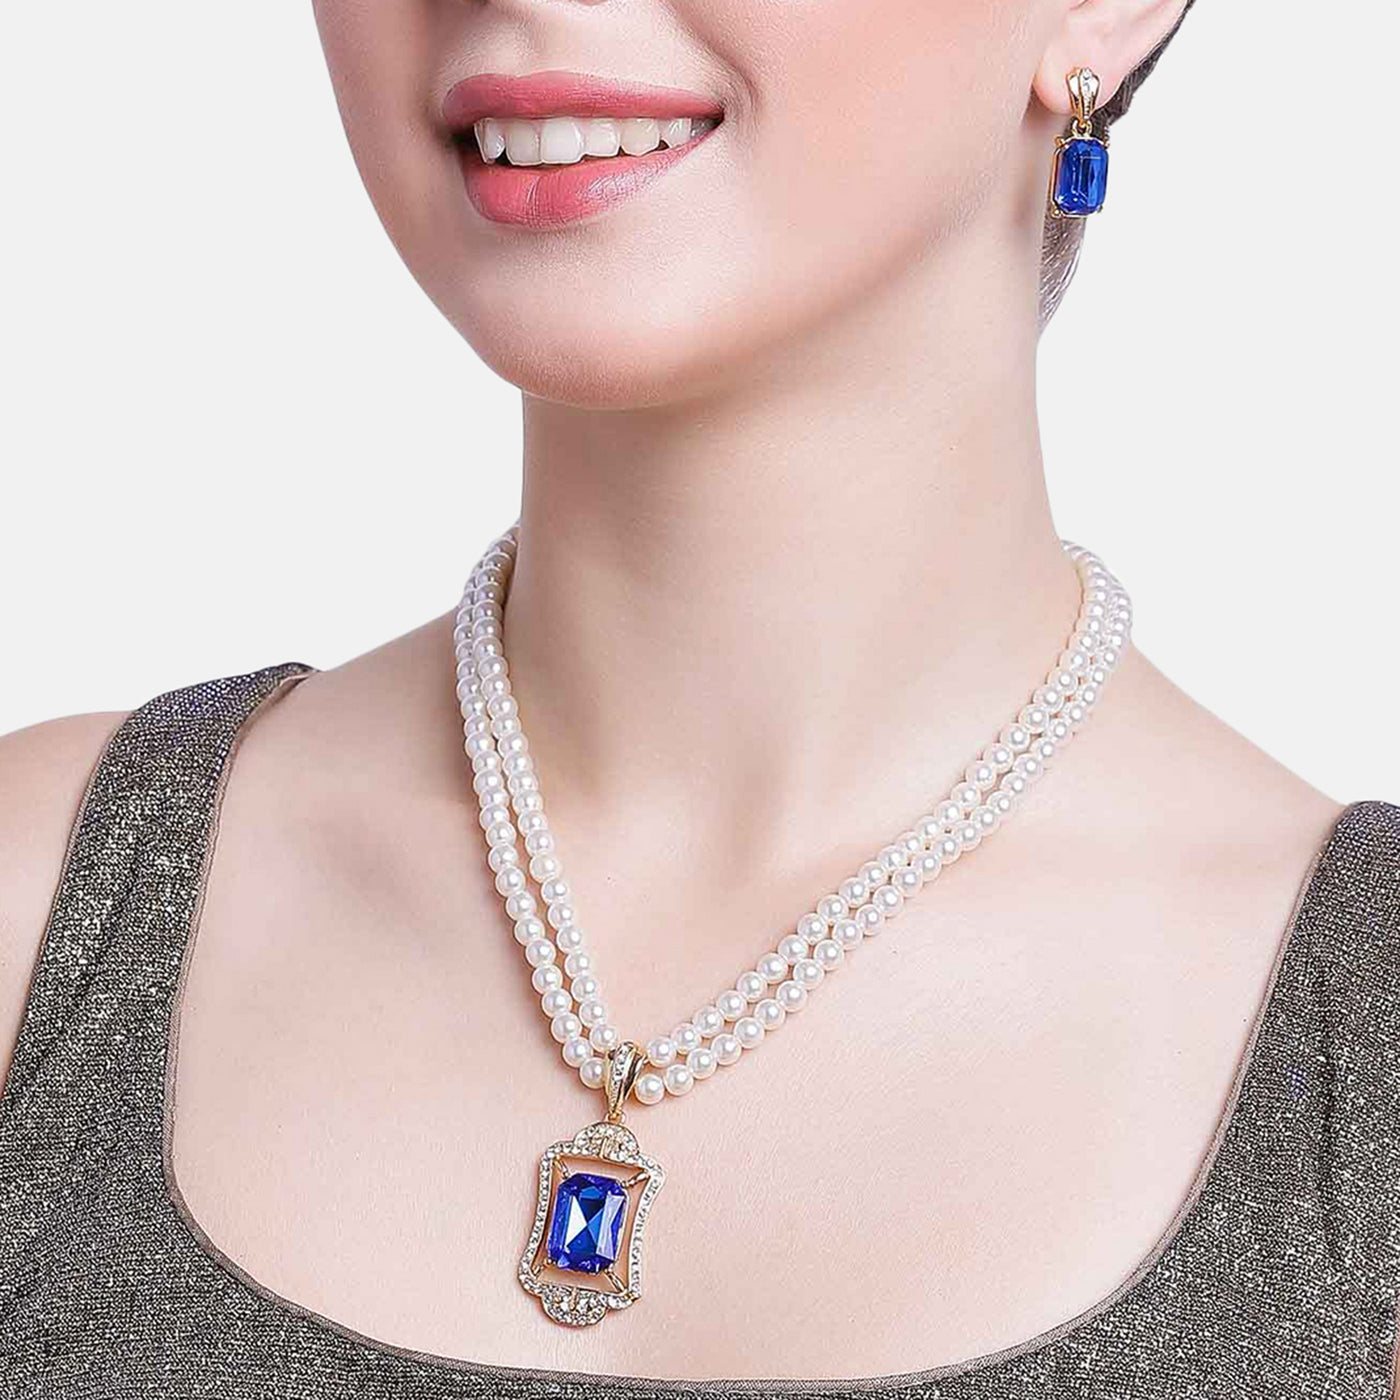 Estele AD Crystal Pearl Necklace Set with blue stones for Women & Girls